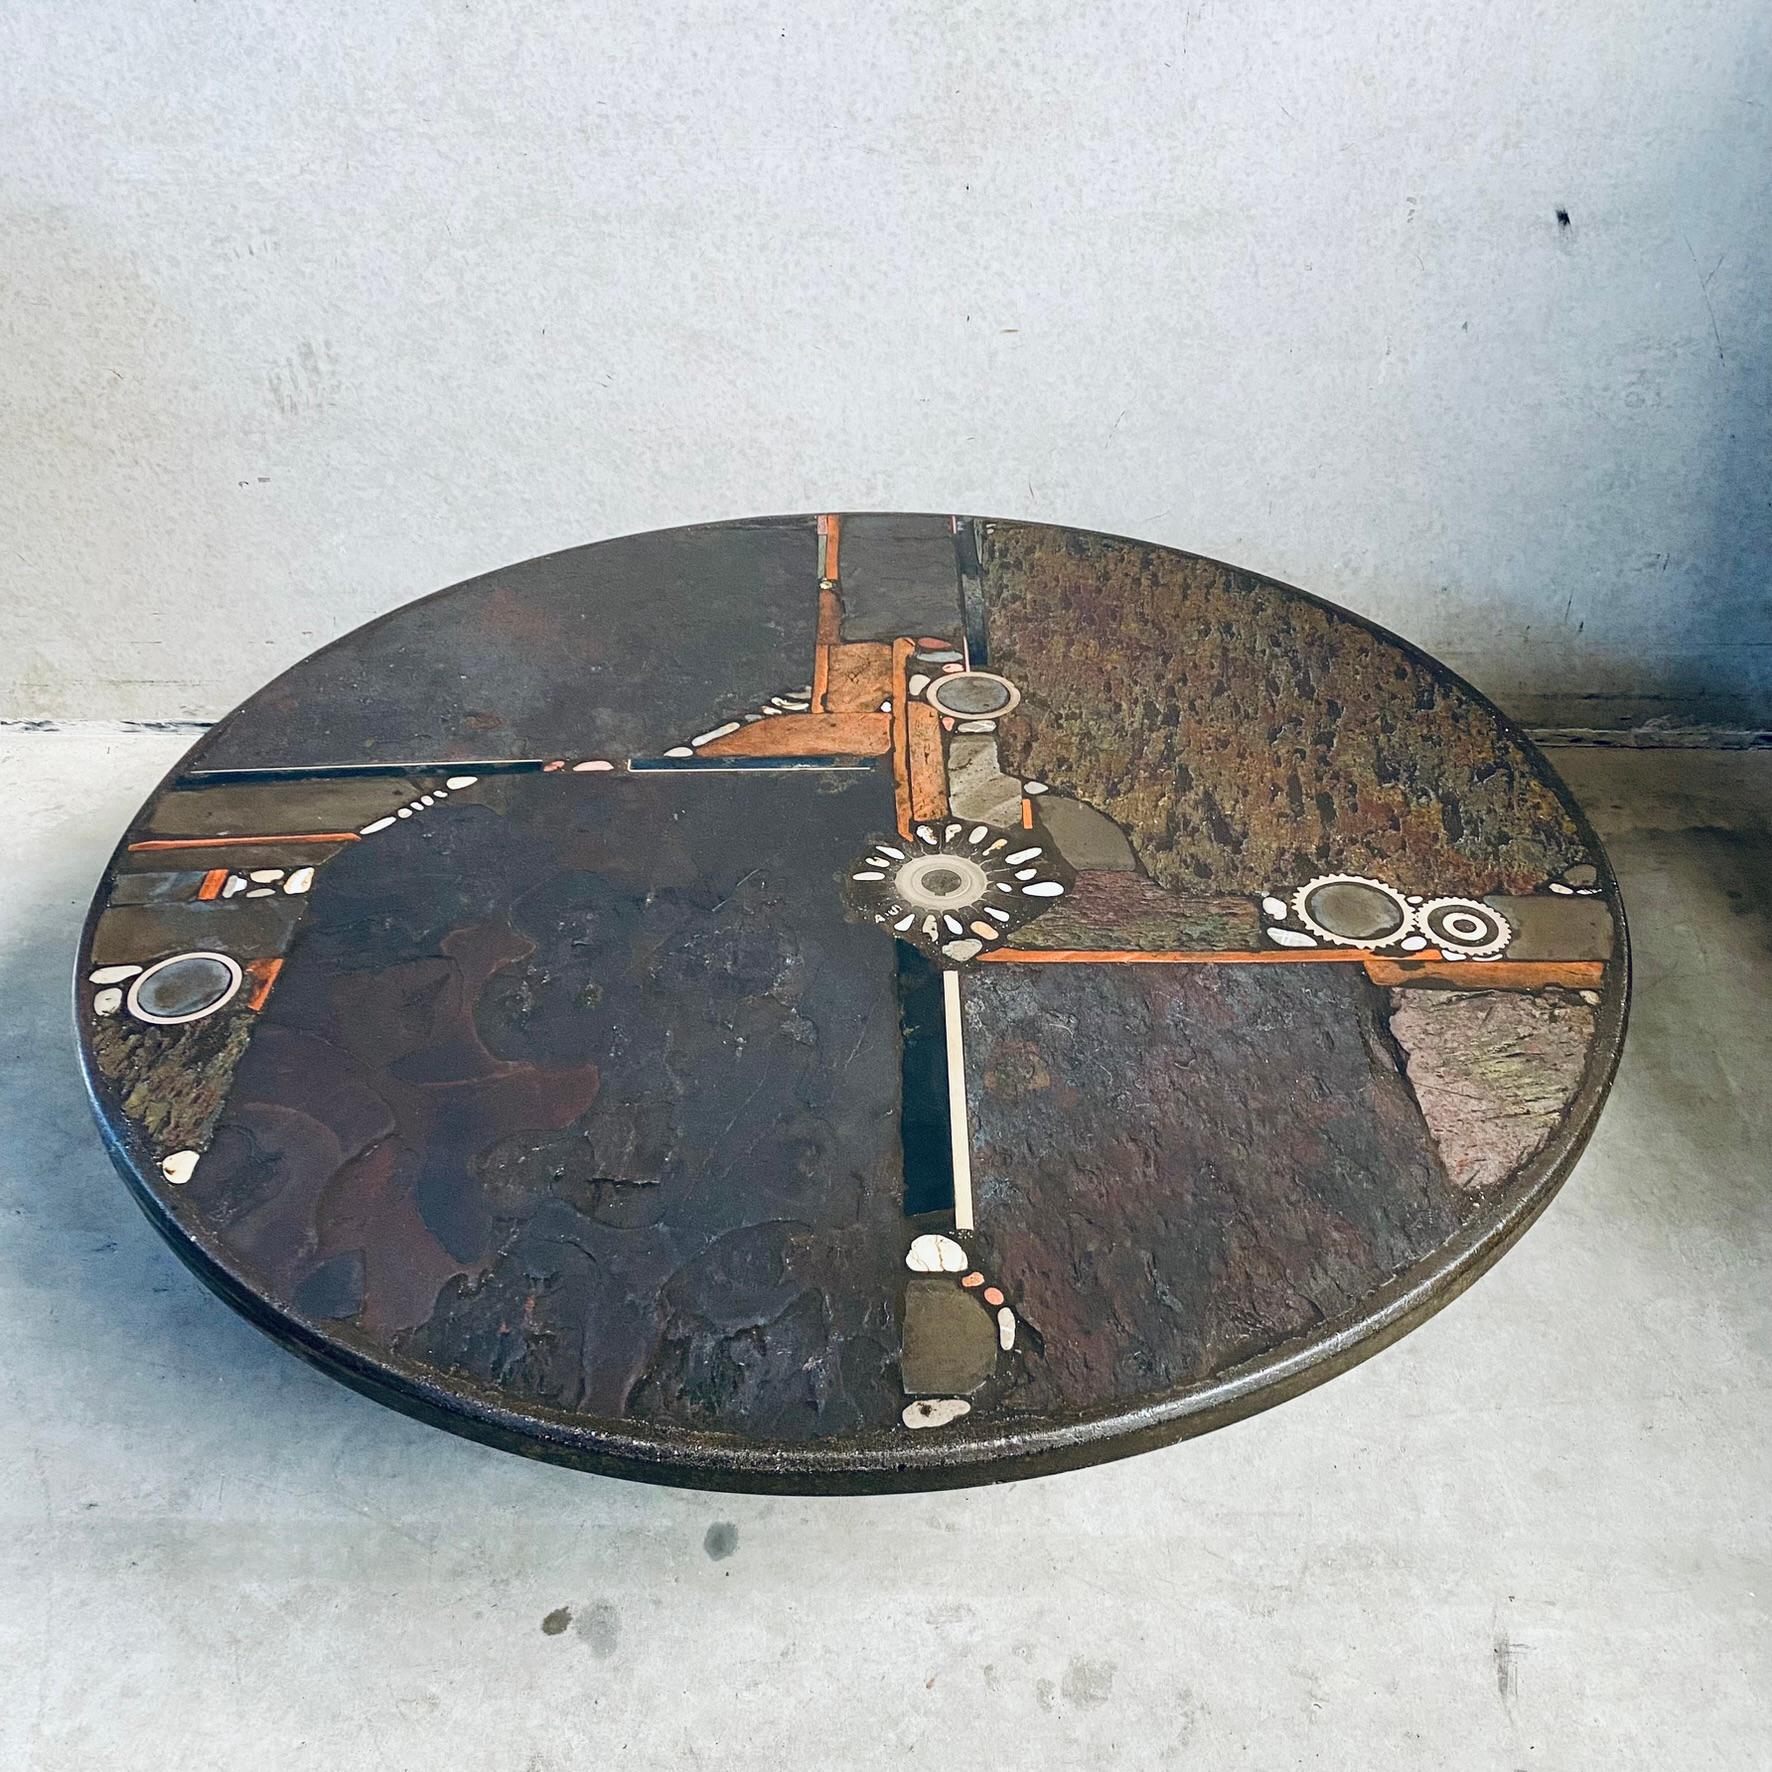 Late 20th Century Brutalist Round Coffee Table by Sculptor Paul Kingma, Netherlands, 1984